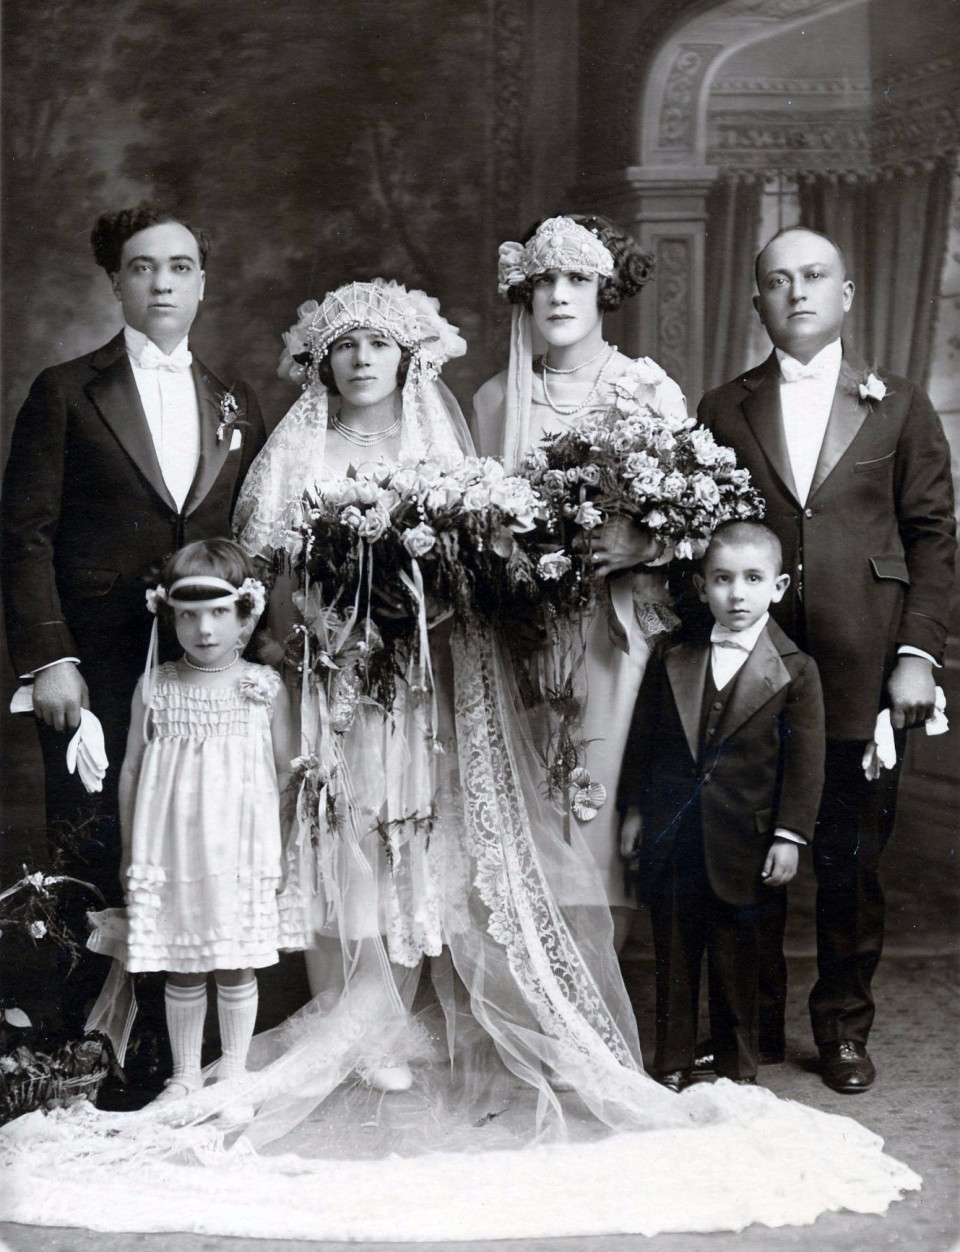 and one more.... A great lady and a Mulberry street legend... my bisnonna's sister in law Anna Maria Cornacchia-Gifoli on her wedding day. She never was able to have kids but was a nonna to all that new her. Her husband Crestino Gifoli was from Serramezzano. Wedding. June 6 1926 - Geraldo Maffea and Irene Trezza as witnesses. Also my Grandmother Filomena is that CUTE little girl.